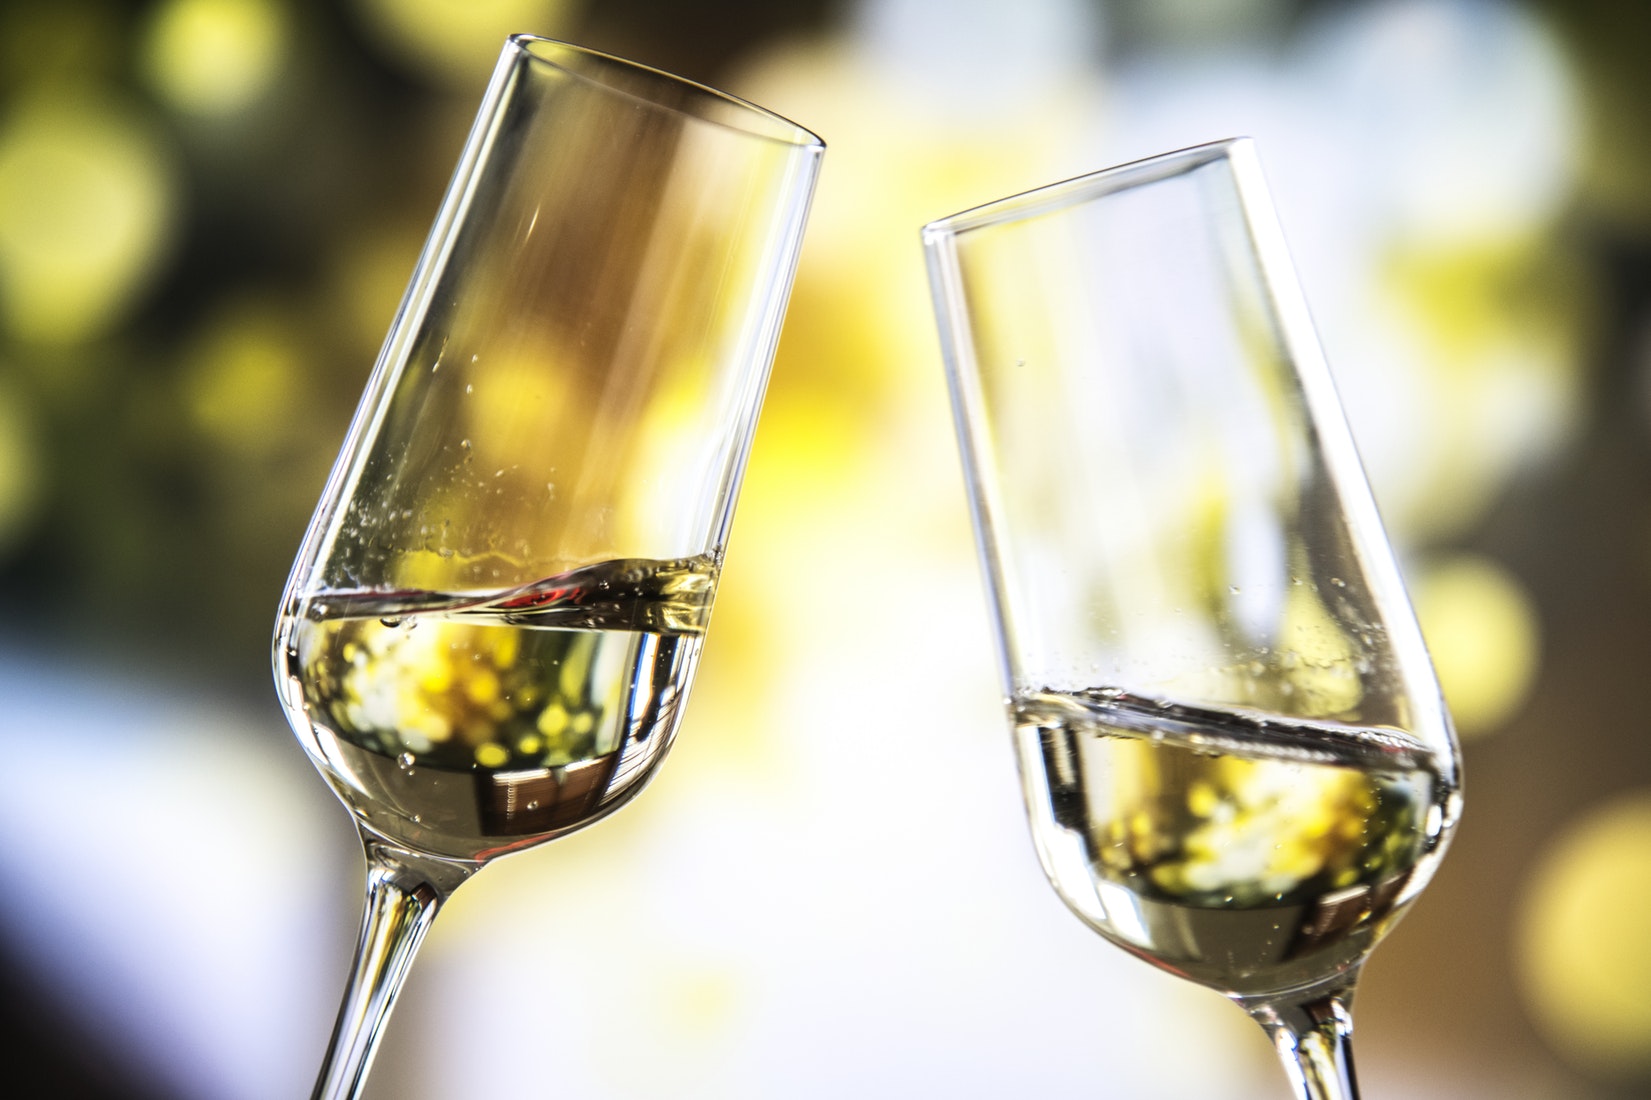 two glass flutes with sparkling gold wine being held against each other in toast